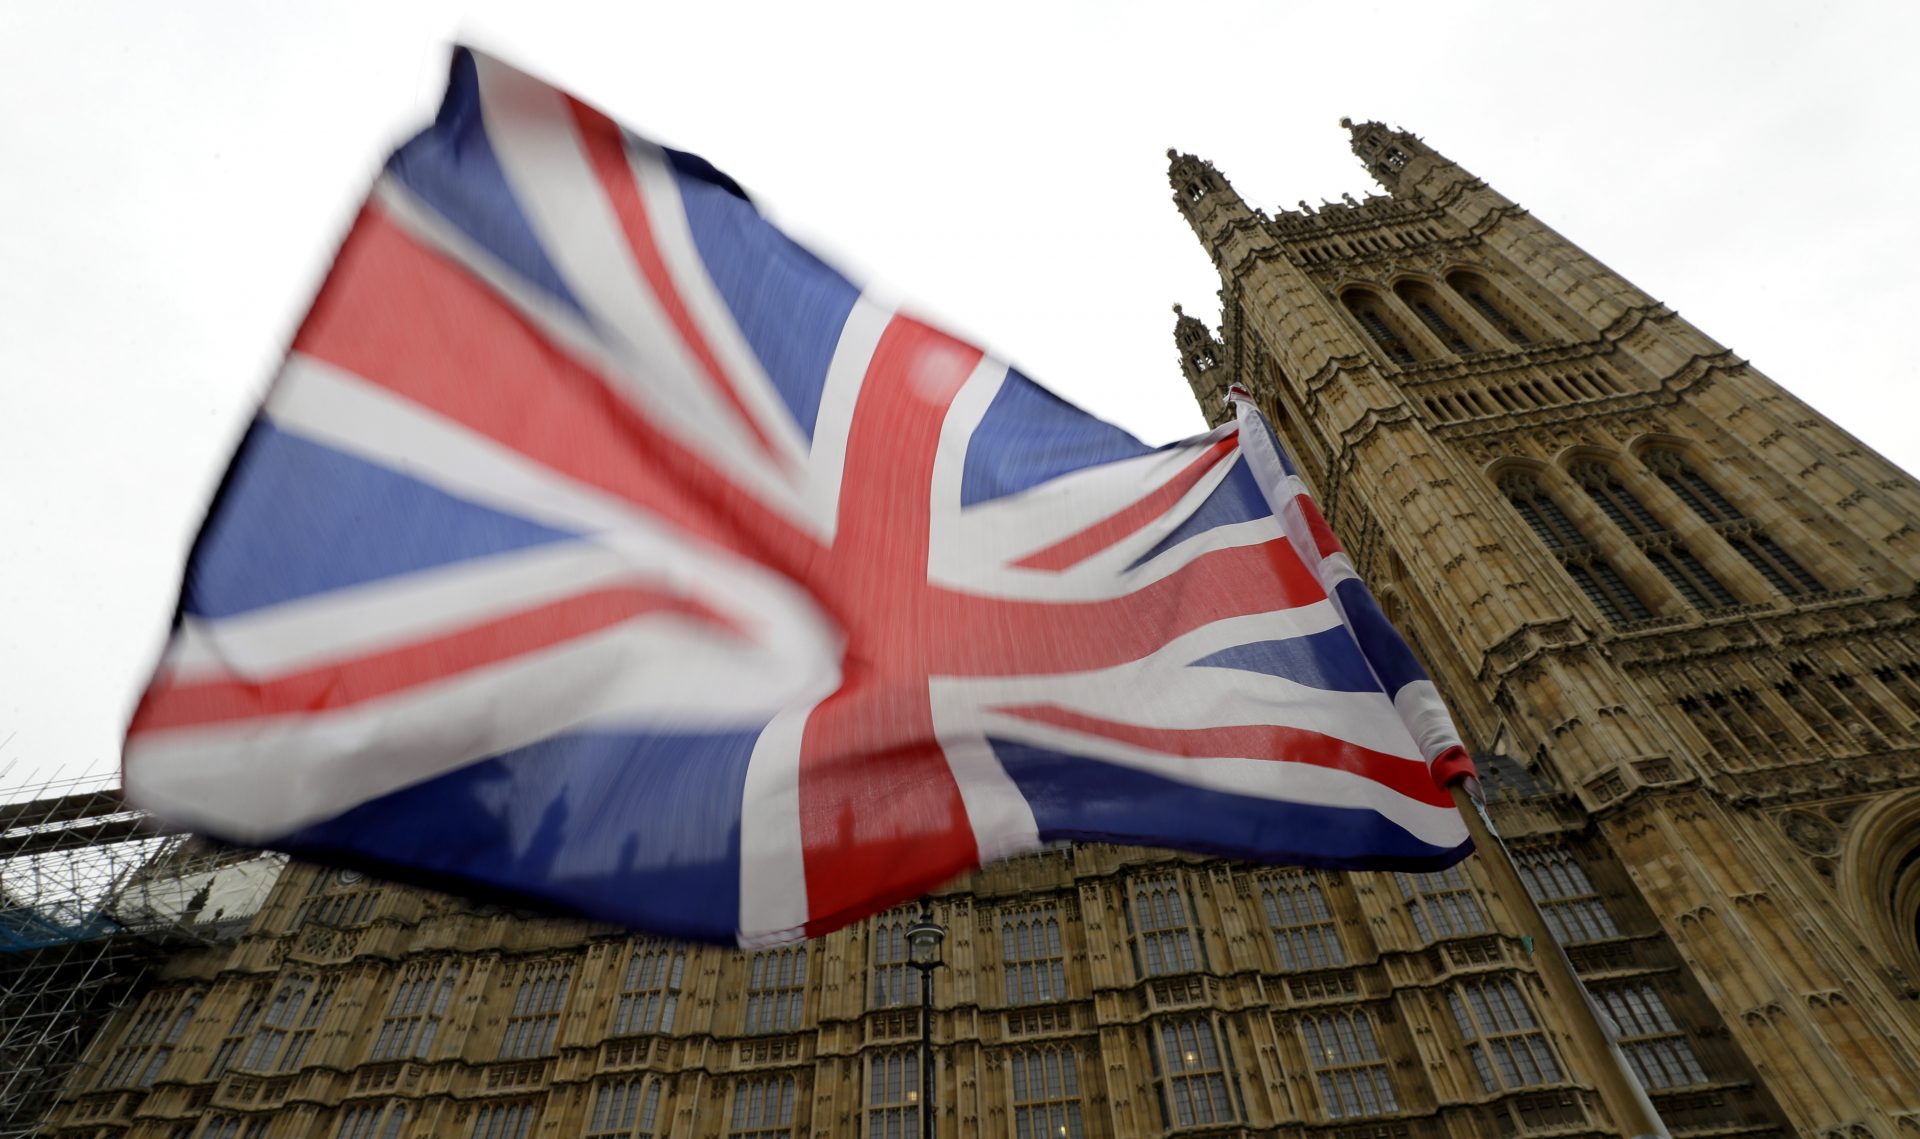 A Union flag flies in front of Parliament in London, Friday, Oct. 25, 2019. Politicians in Britain and the European Union seem to be looking to each other to break the Brexit deadlock.